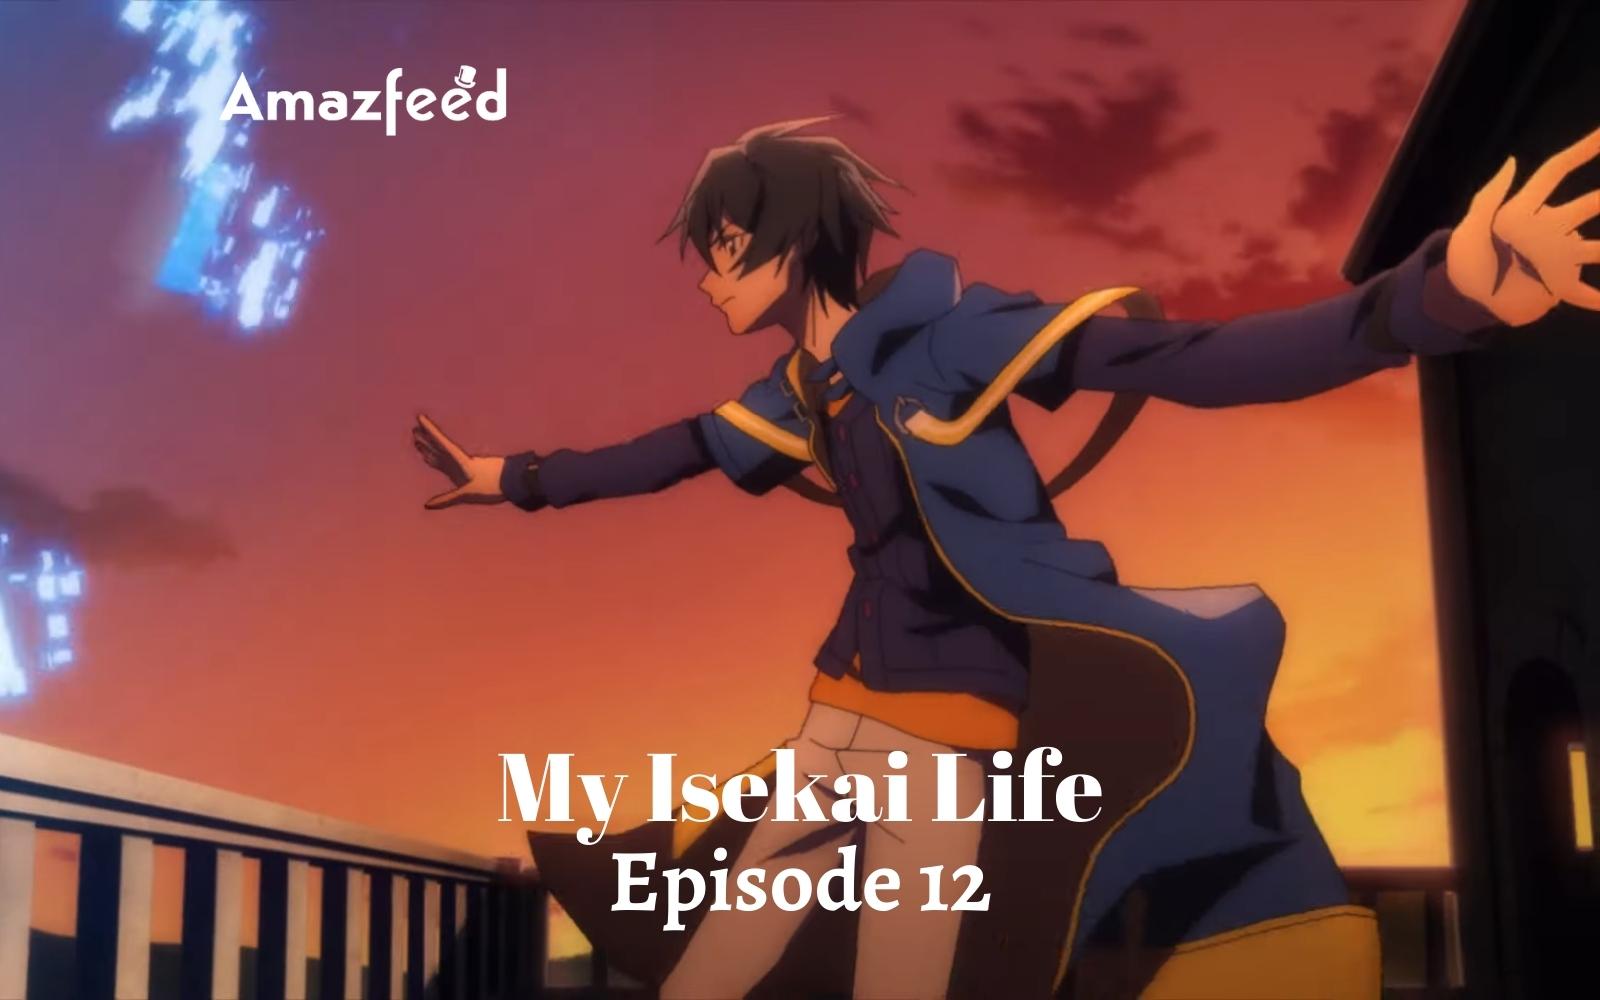 My Isekai Life Episode 5: The Troubling Snow! Release Date & Plot